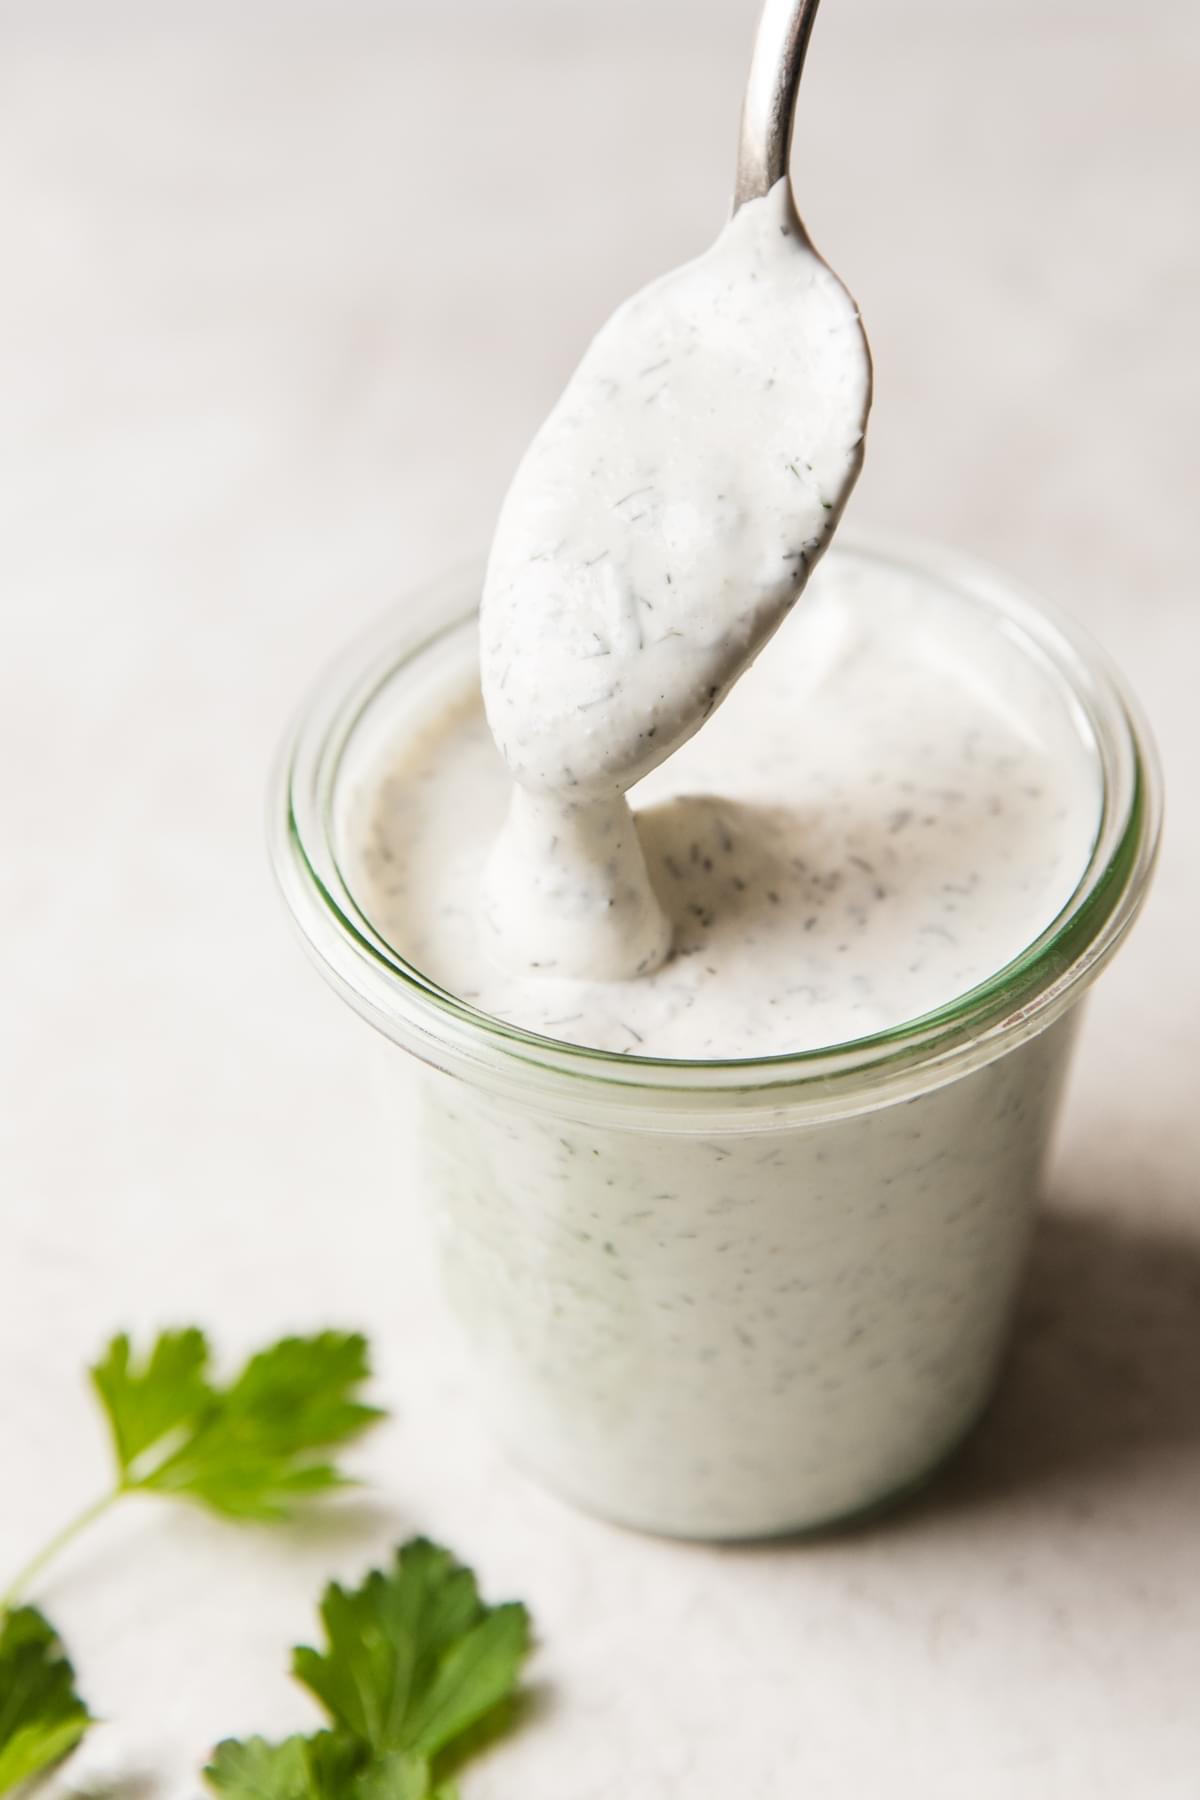 spoon dipped in jar of homemade ranch dressing